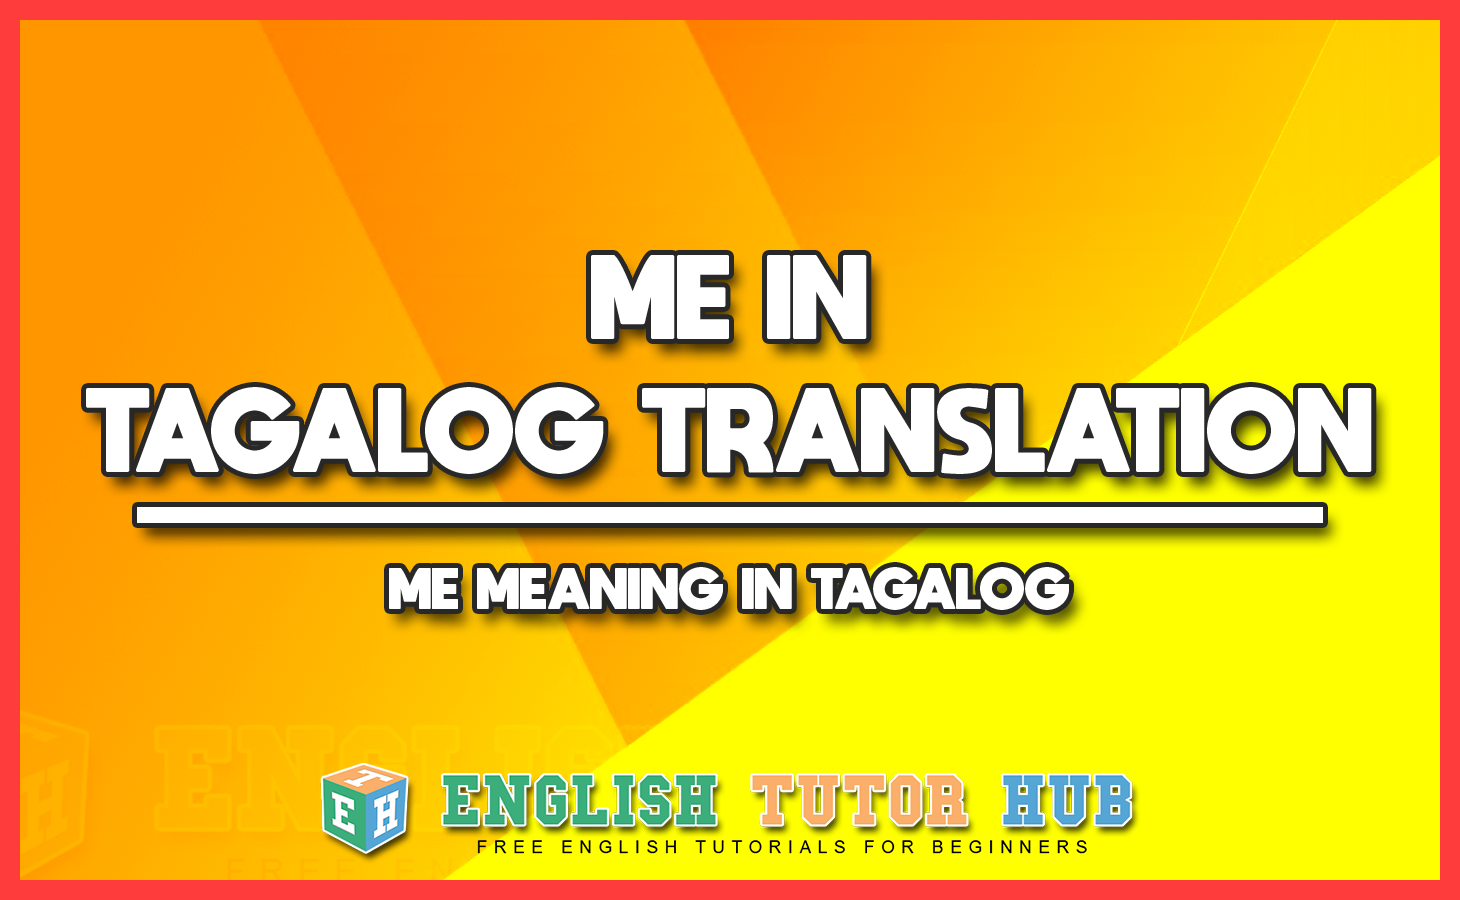 ME IN TAGALOG TRANSLATION - ME MEANING IN TAGALOG